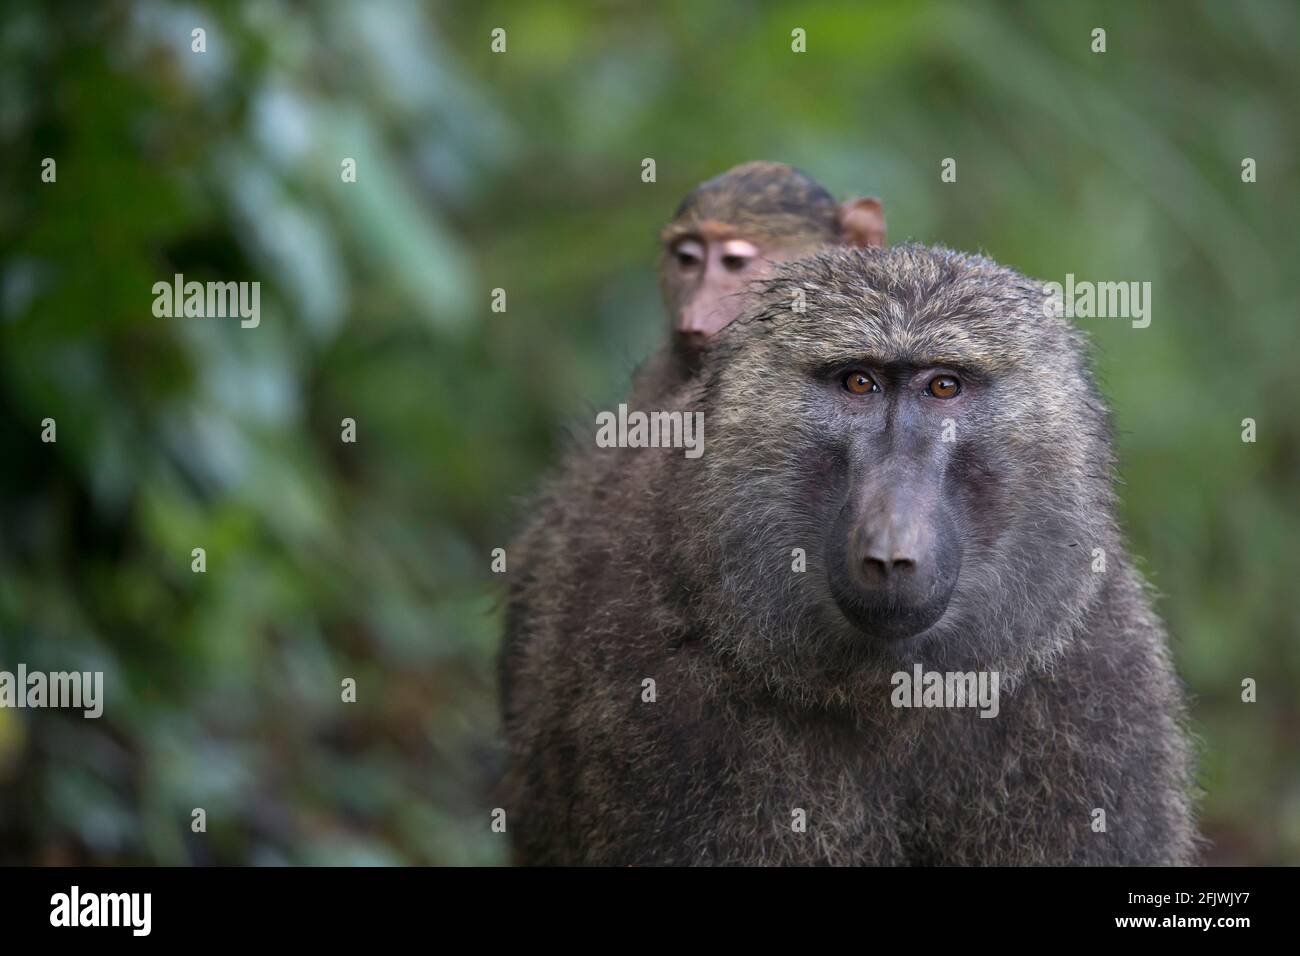 An Anubis Baboon is carrying its youngster. Stock Photo